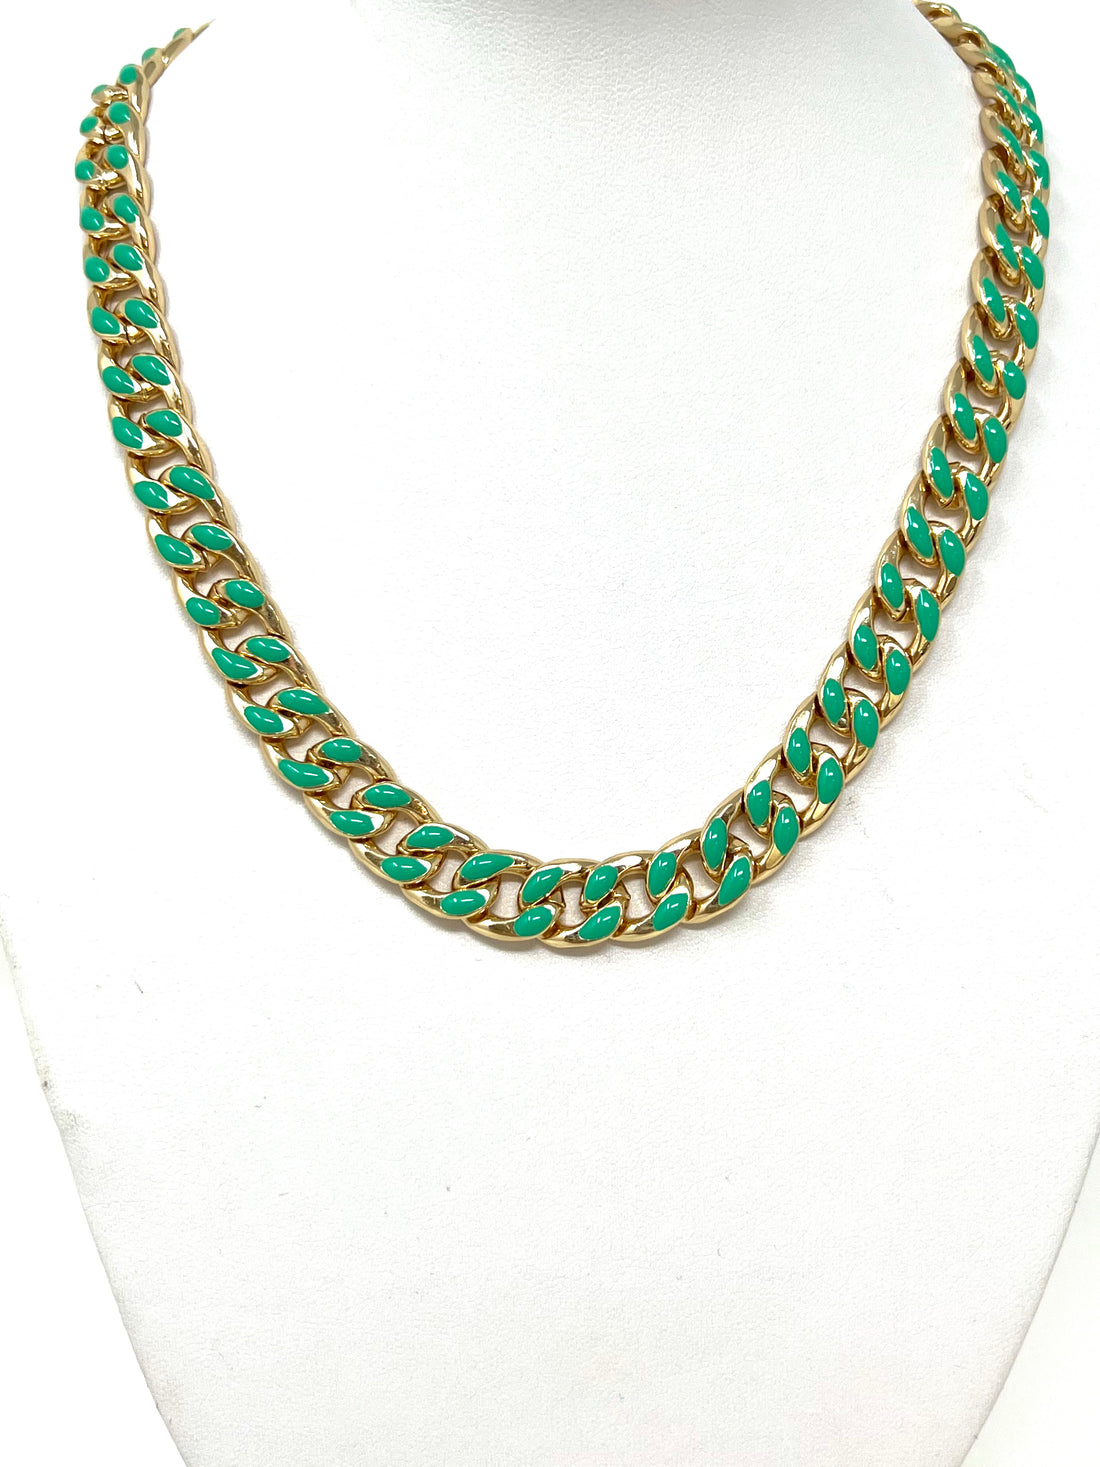 Enamel Curb Chain Necklace in Gold with Green